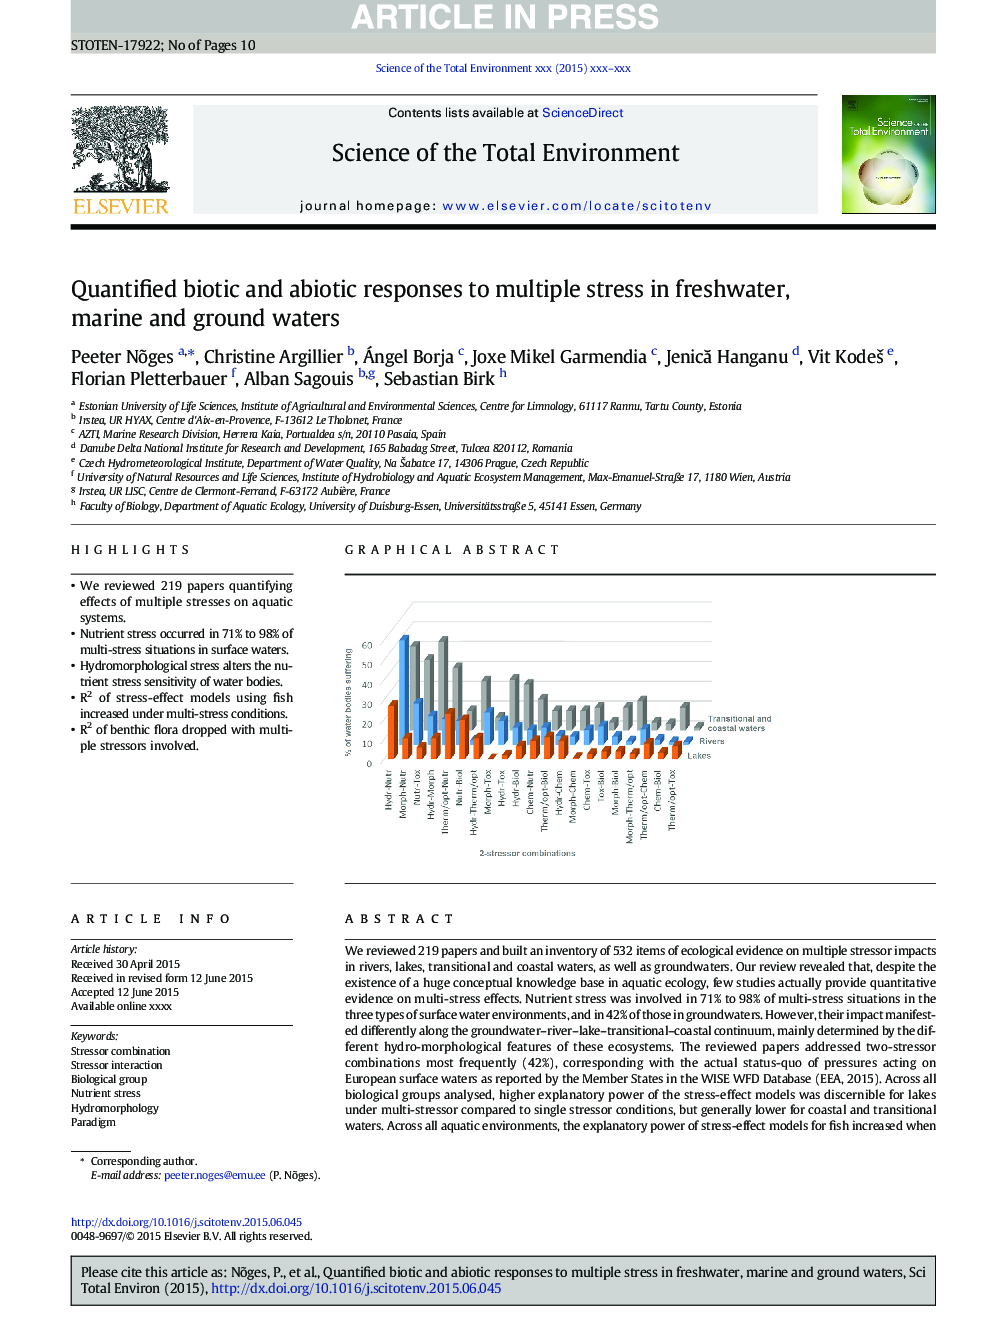 Quantified biotic and abiotic responses to multiple stress in freshwater, marine and ground waters